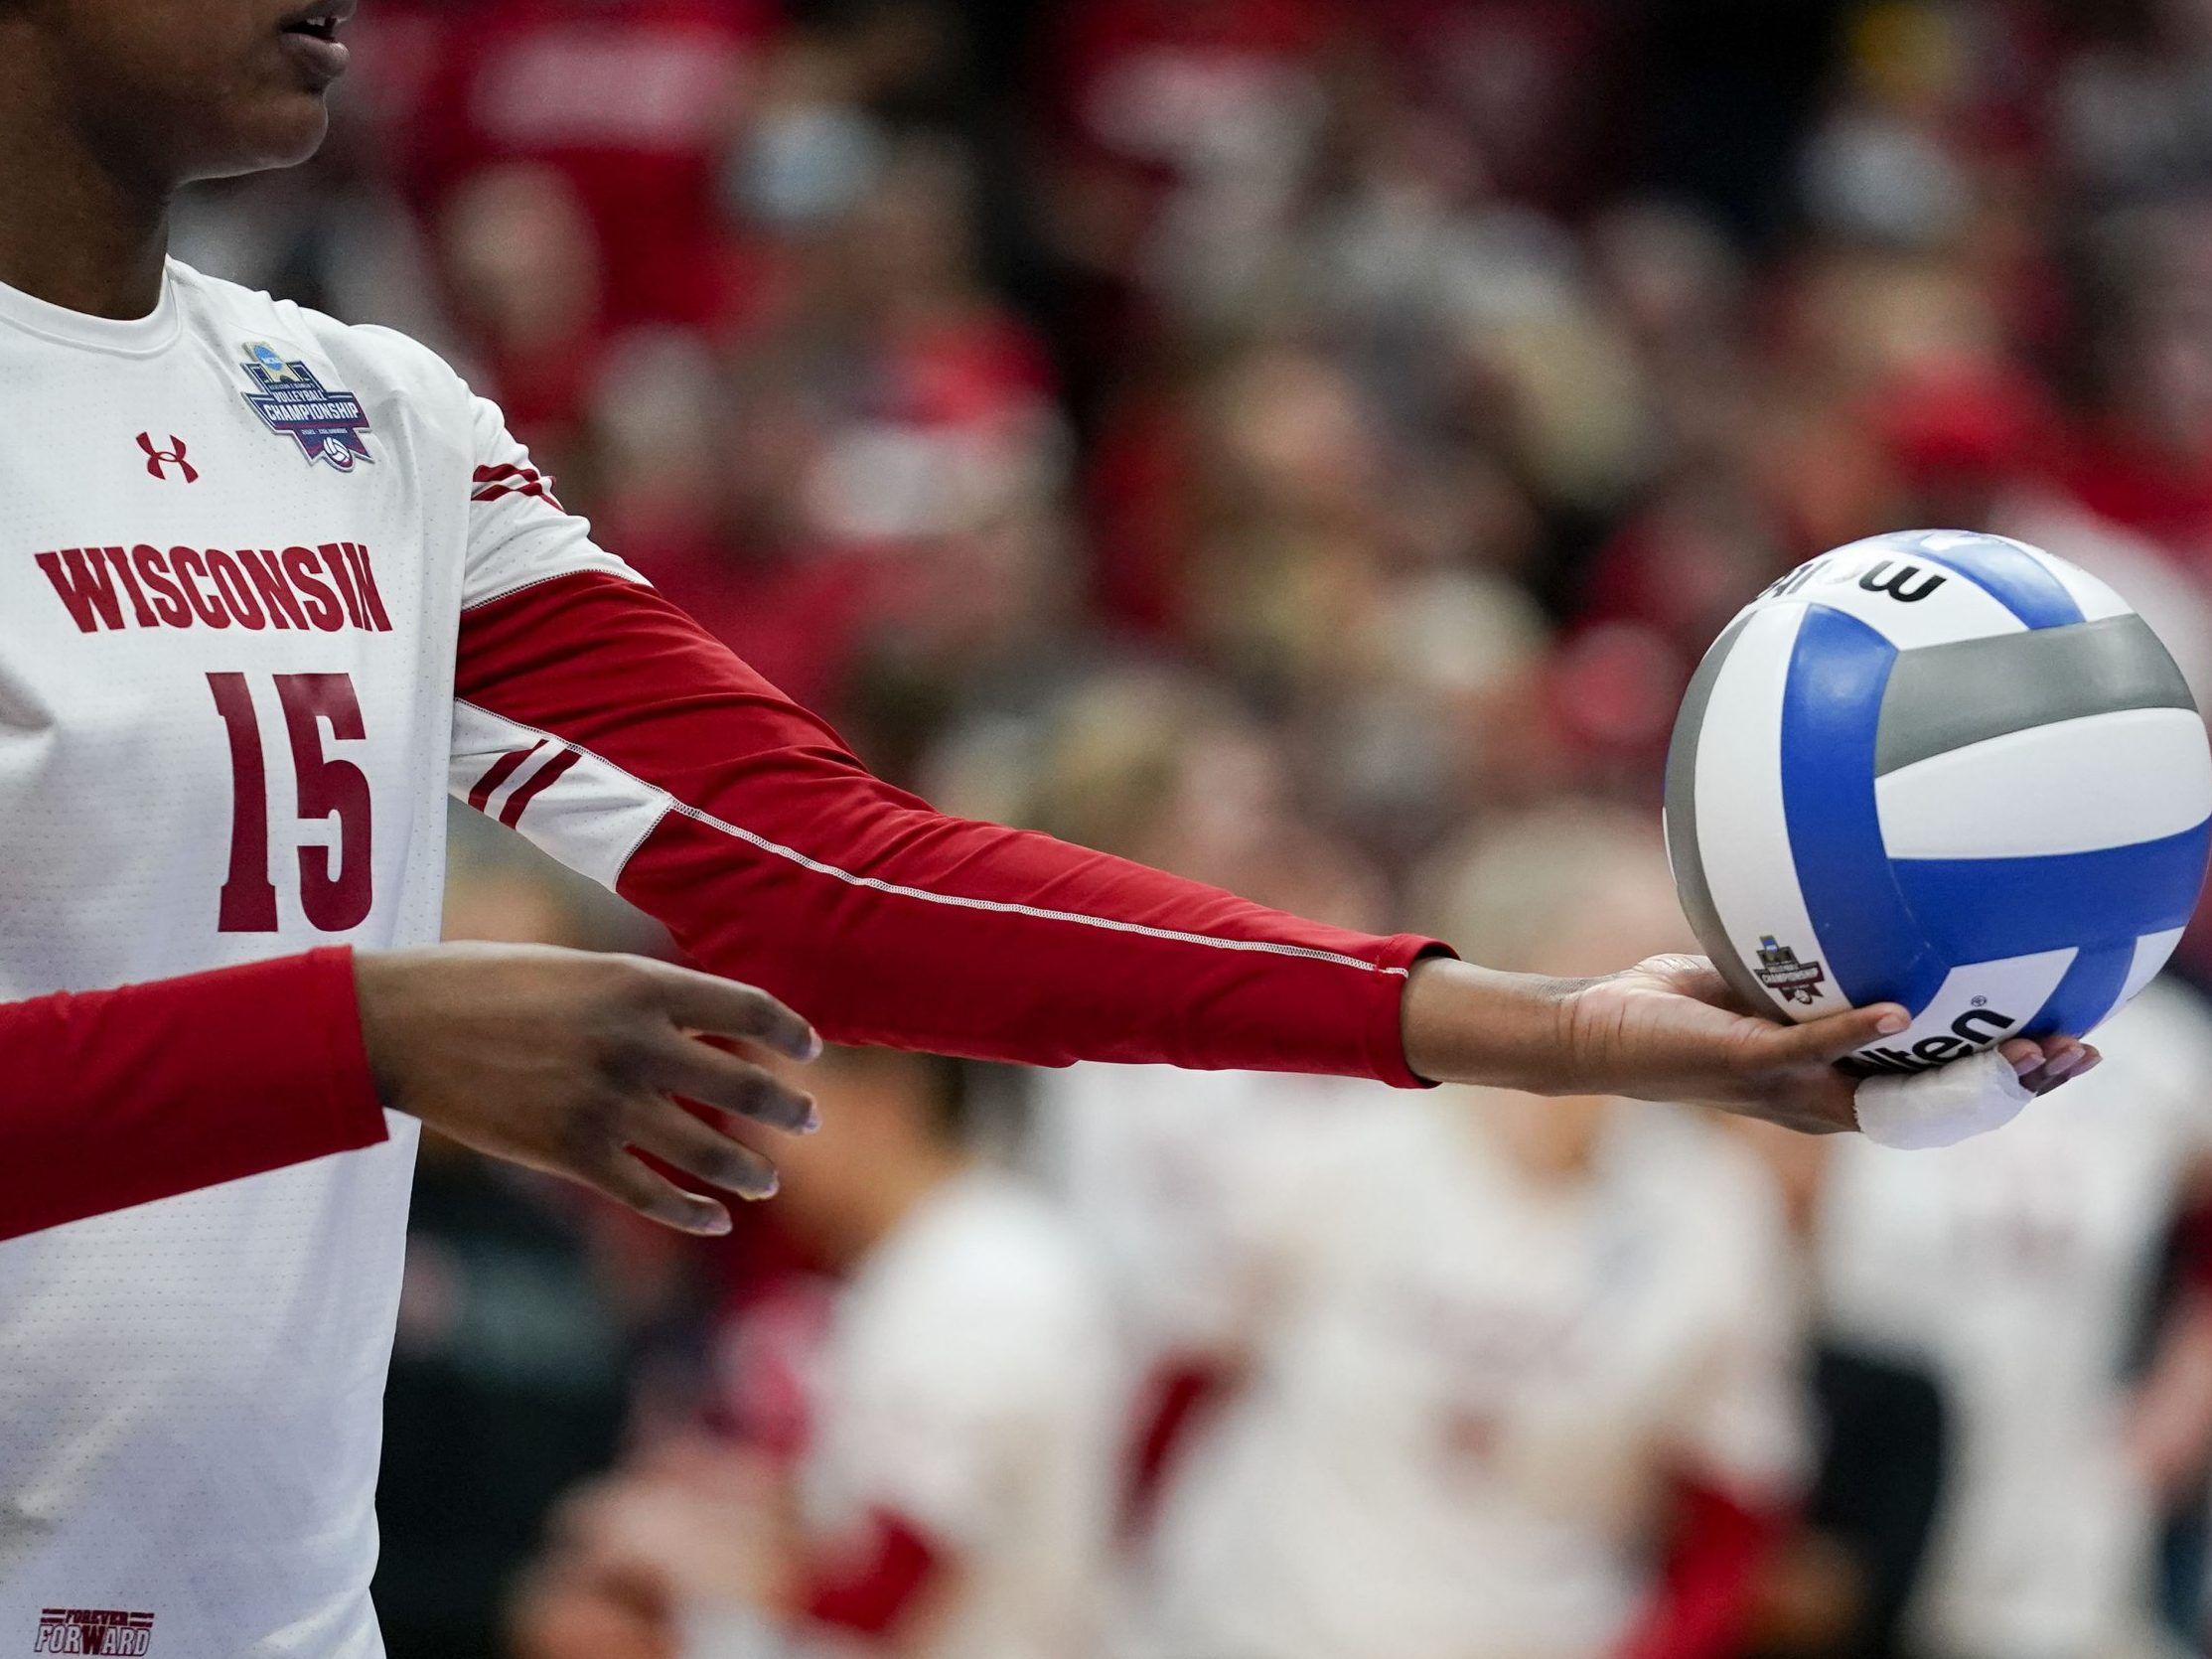 Wisconsin volleyball team leaks nudes